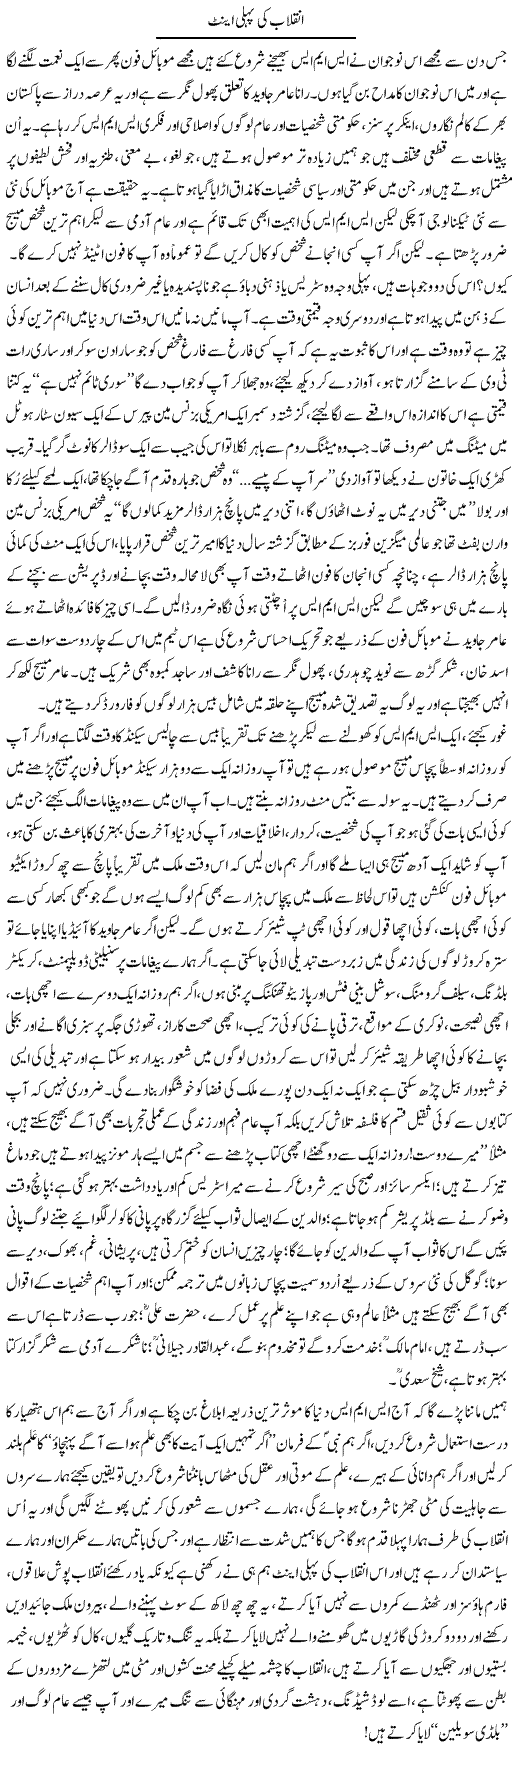 First Step of Revolution Express Column Amad Chaudhry 21 September 2010